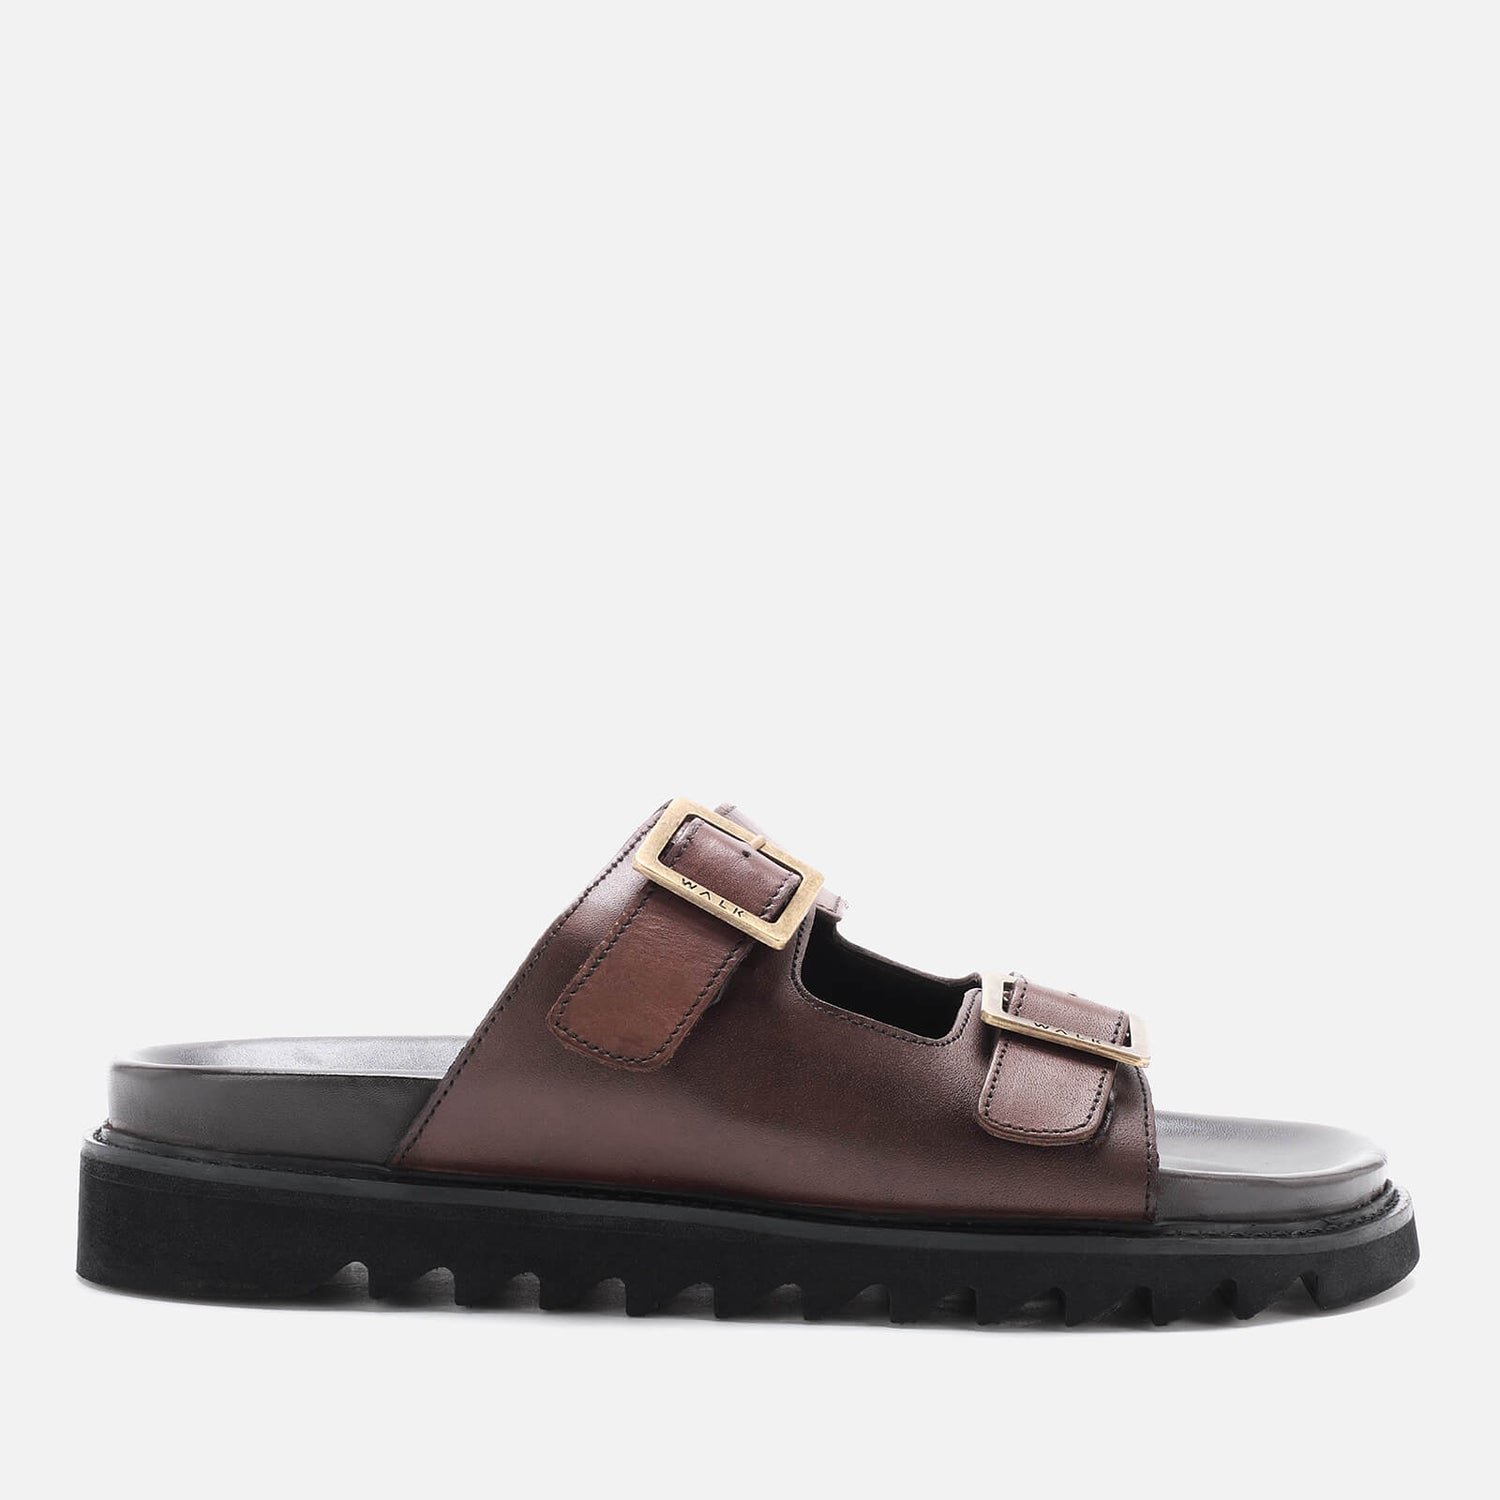 Walk London Men's Jaws Leather Double Strap Sandals - Brown - UK 8